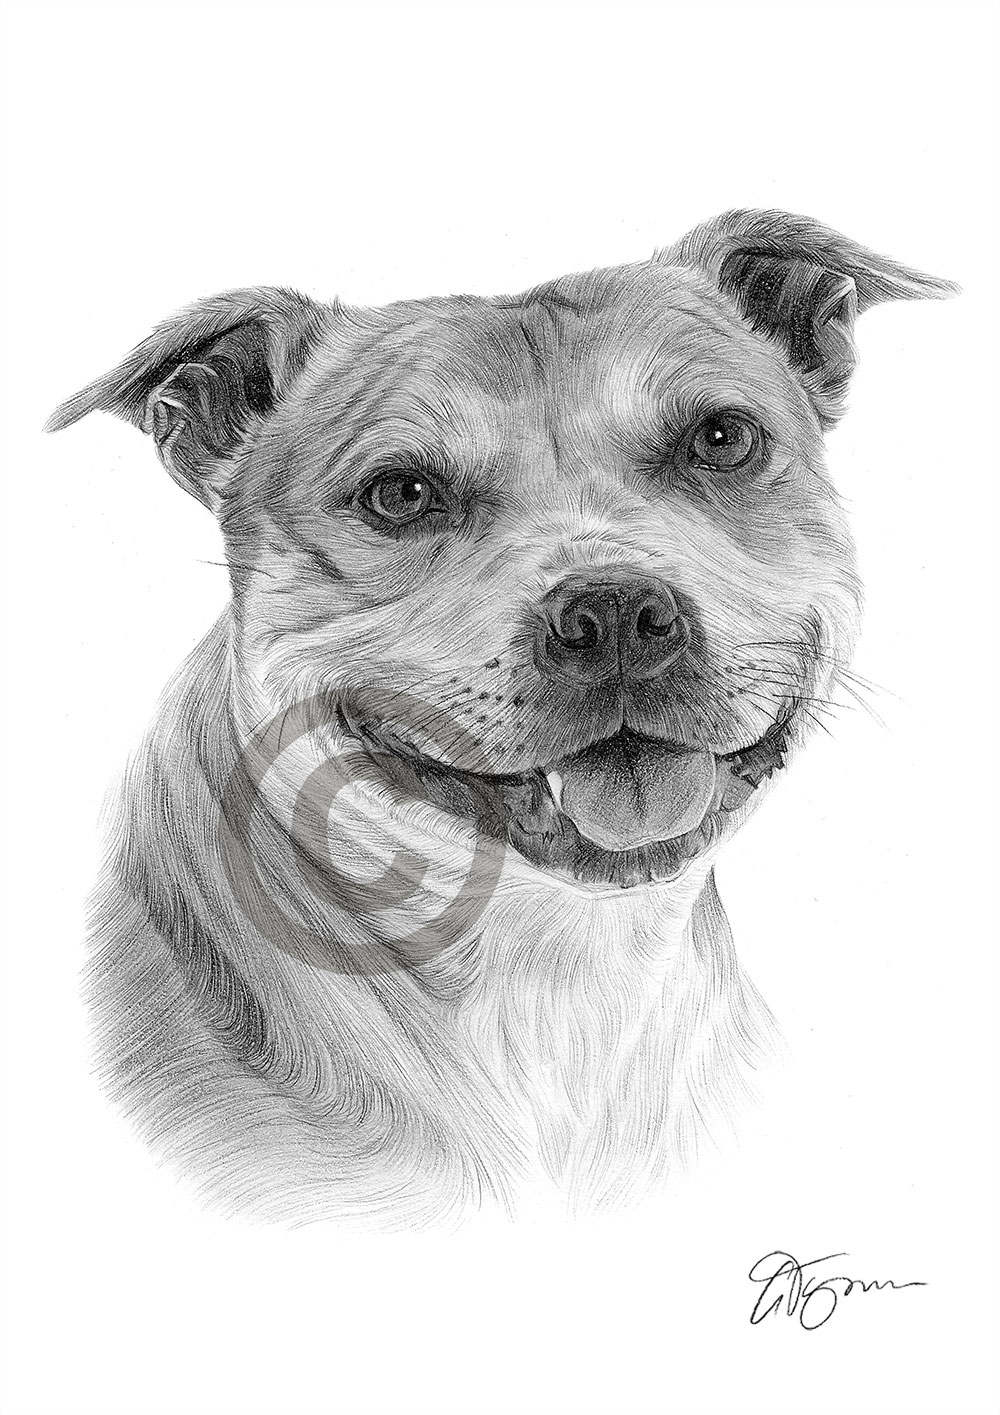 Pencil drawing of a young staffordshire bull terrier by artist Gary Tymon